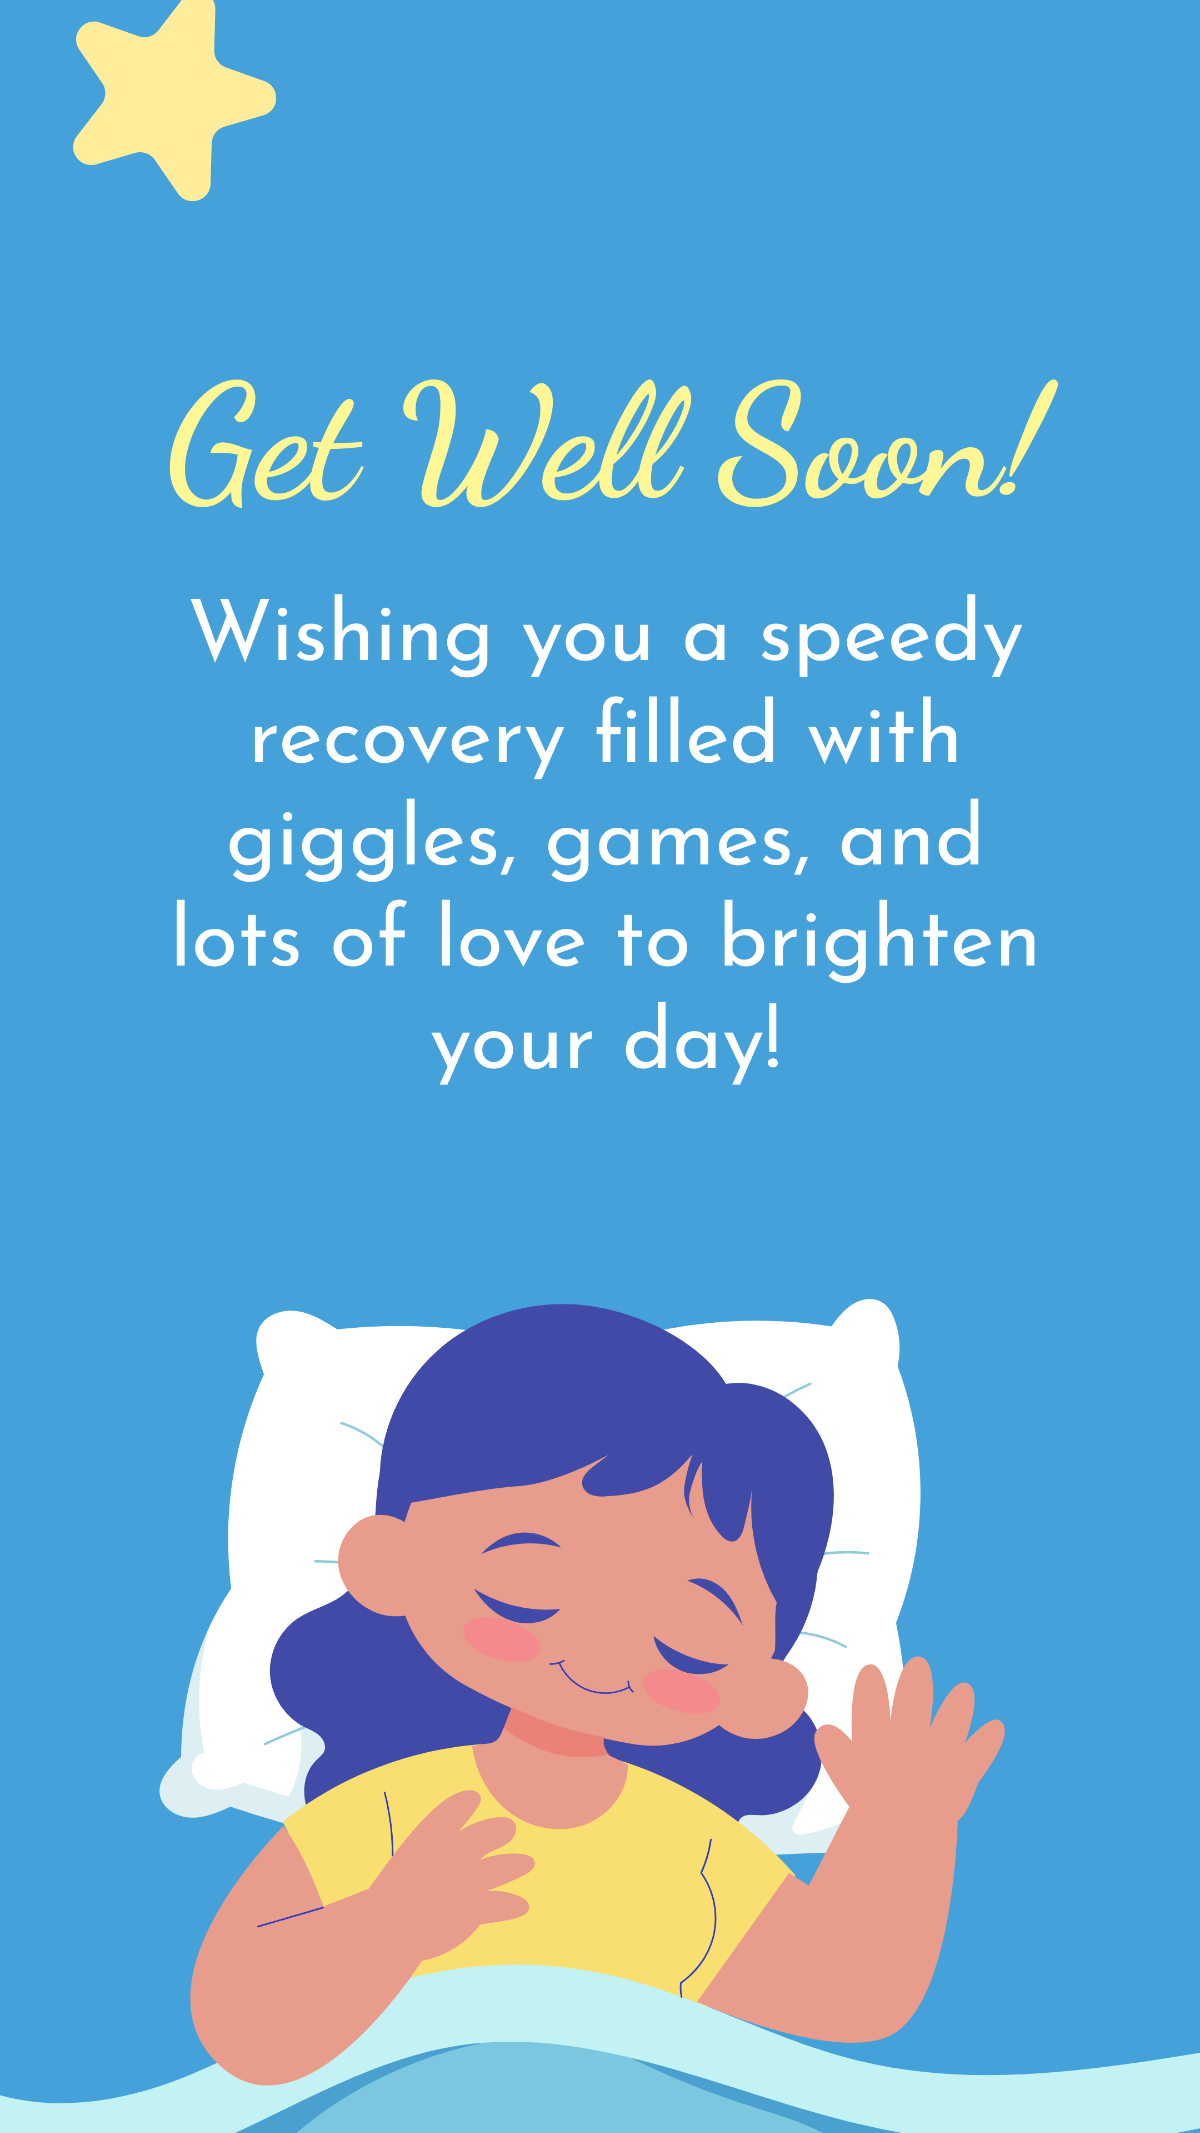 Get Well Soon Message For Kids